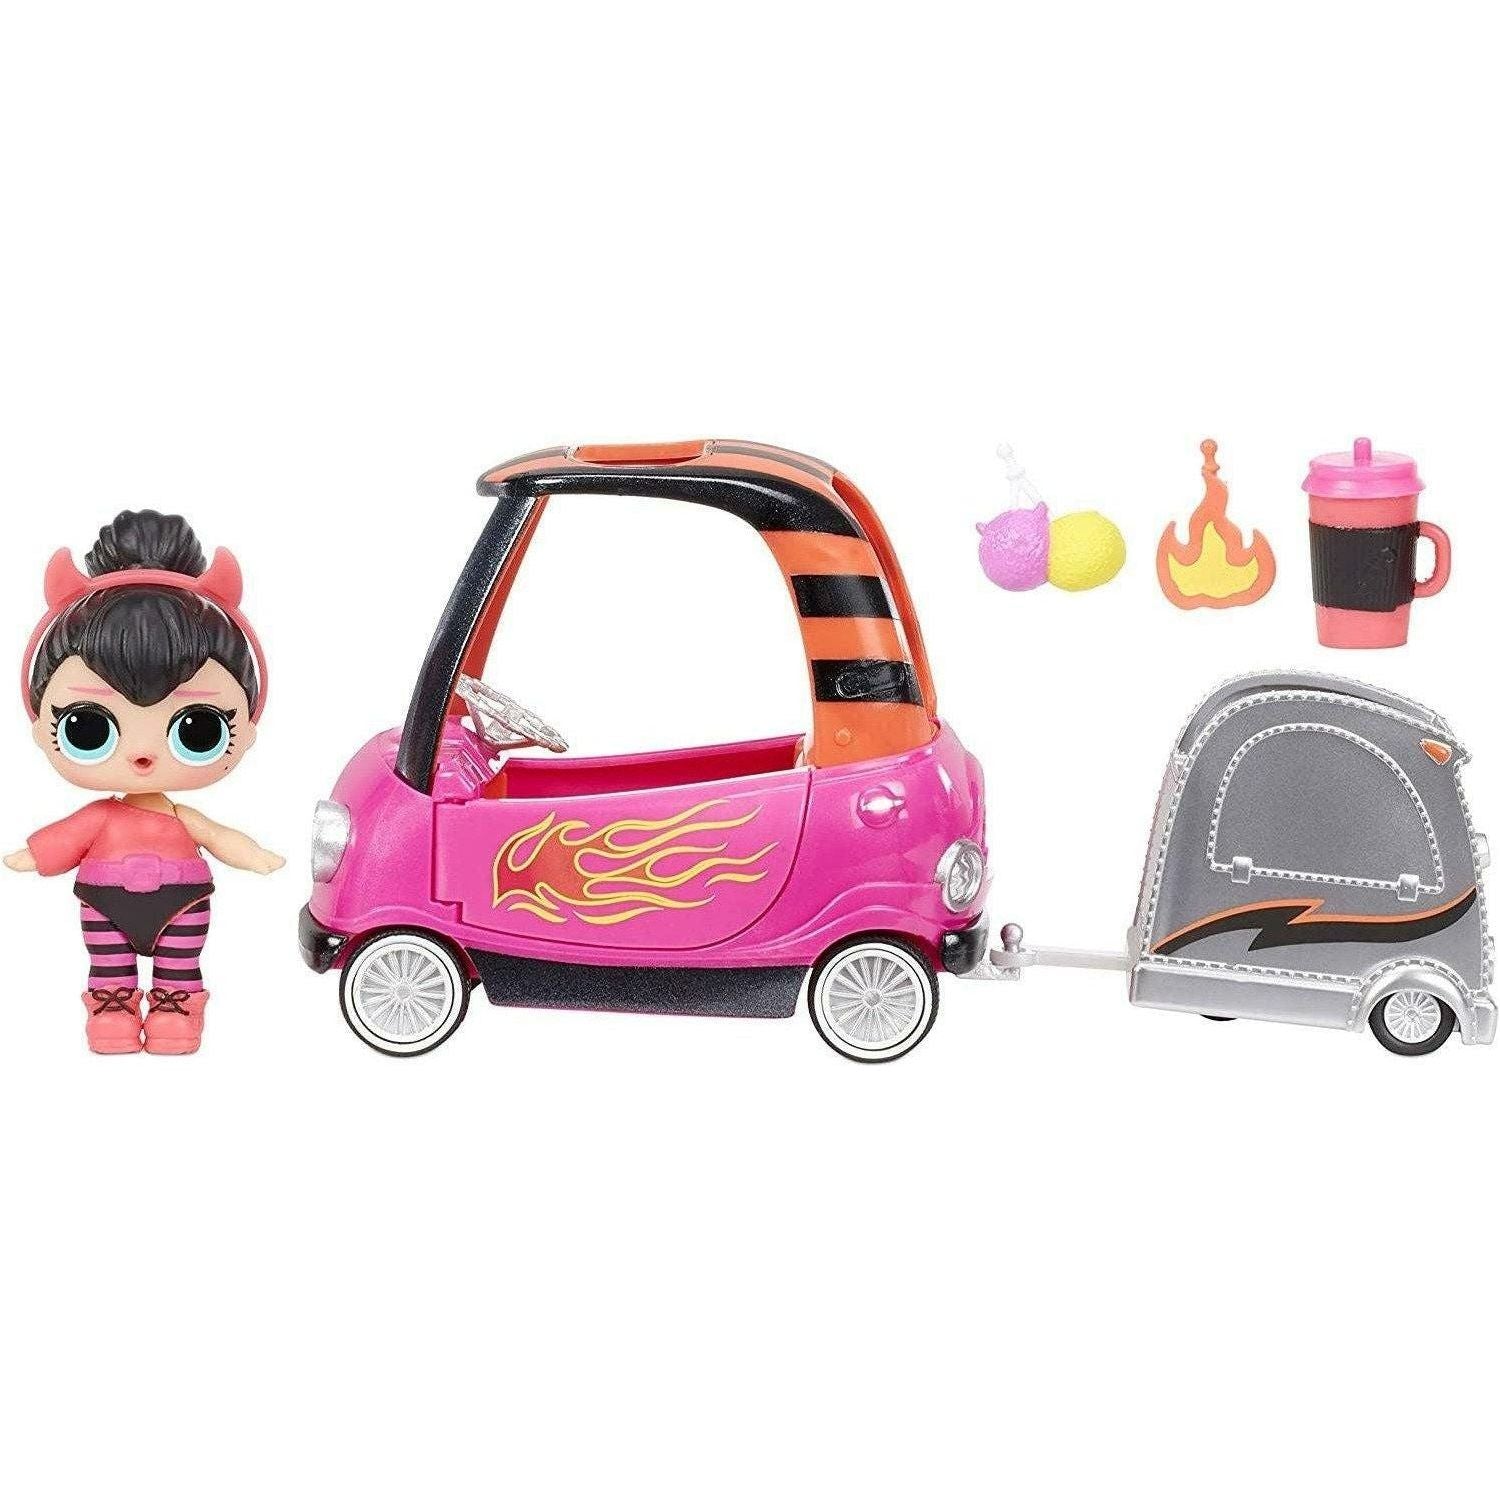 L.O.L Surprise B.B. Auto Shop with Spice Doll and 10+ Surprises - BumbleToys - 5-7 Years, Dolls, Fashion Dolls & Accessories, Girls, L.O.L, OXE